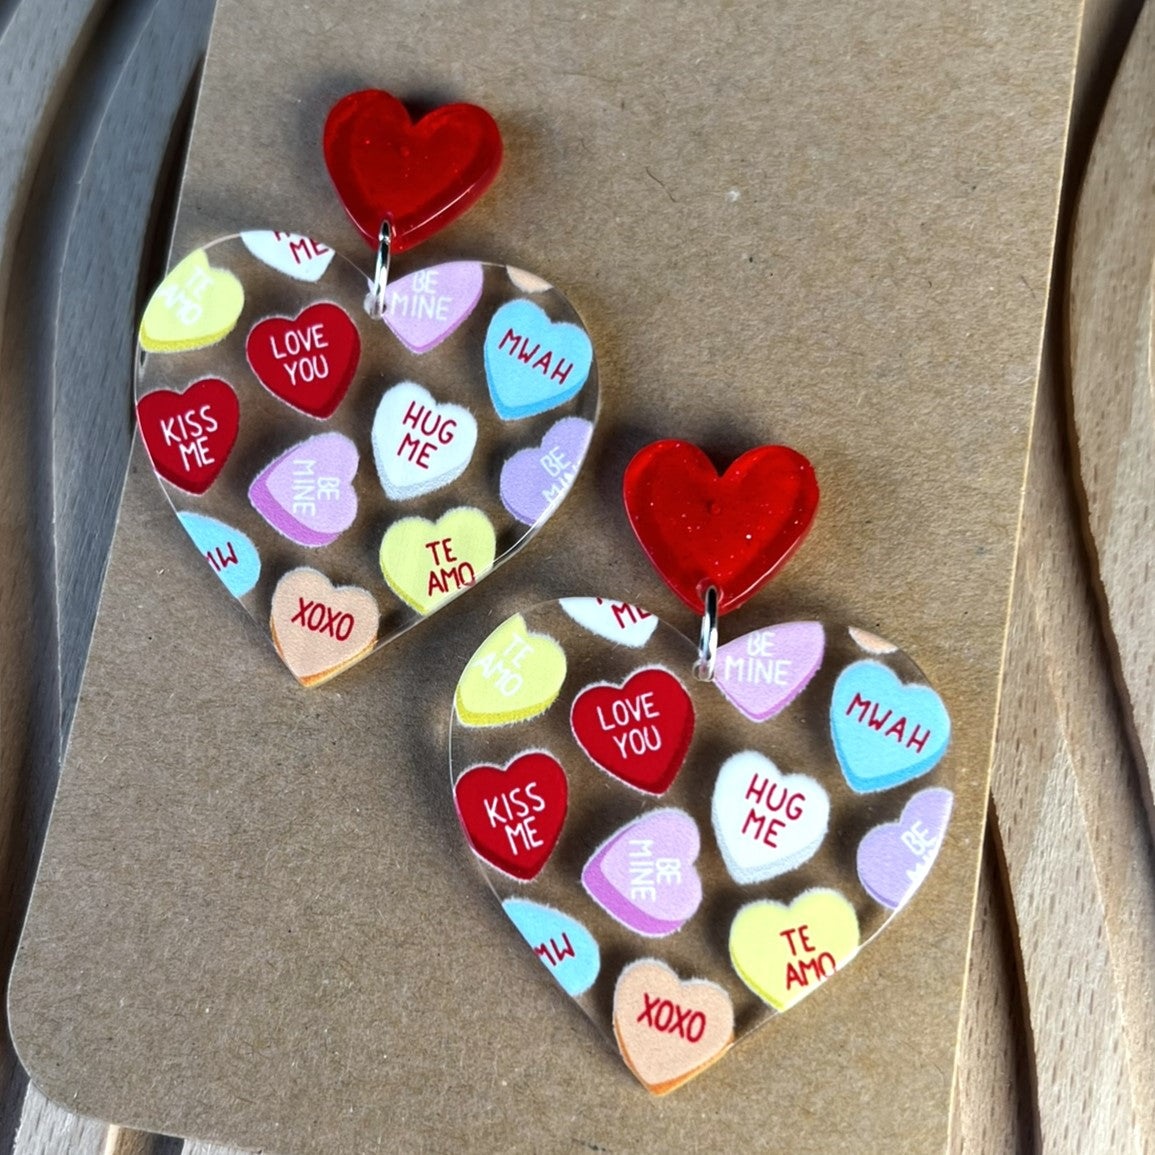 Colorful Conversation Heart Dangle Earrings for Valentine's Day, Handmade Jewelry | Acrylic and Metal | QTY: 1 Pair